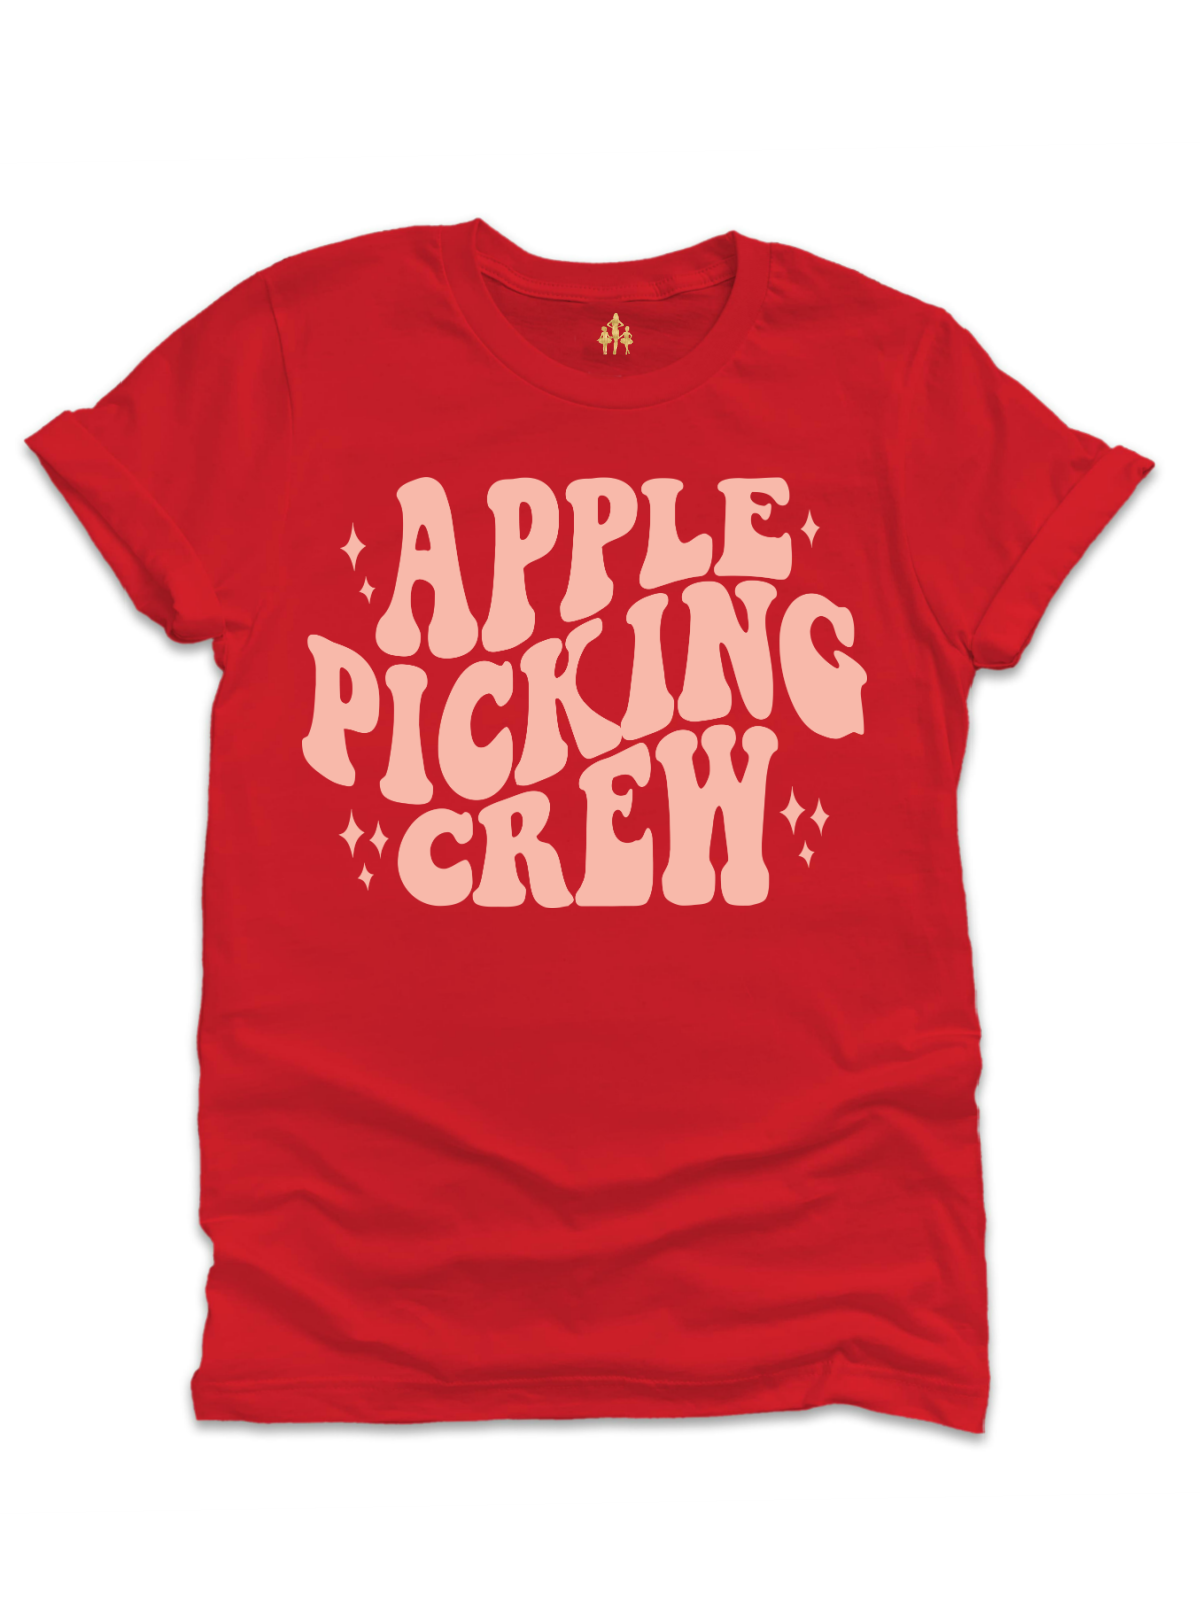 Apple Picking Crew Adult Shirt in Red